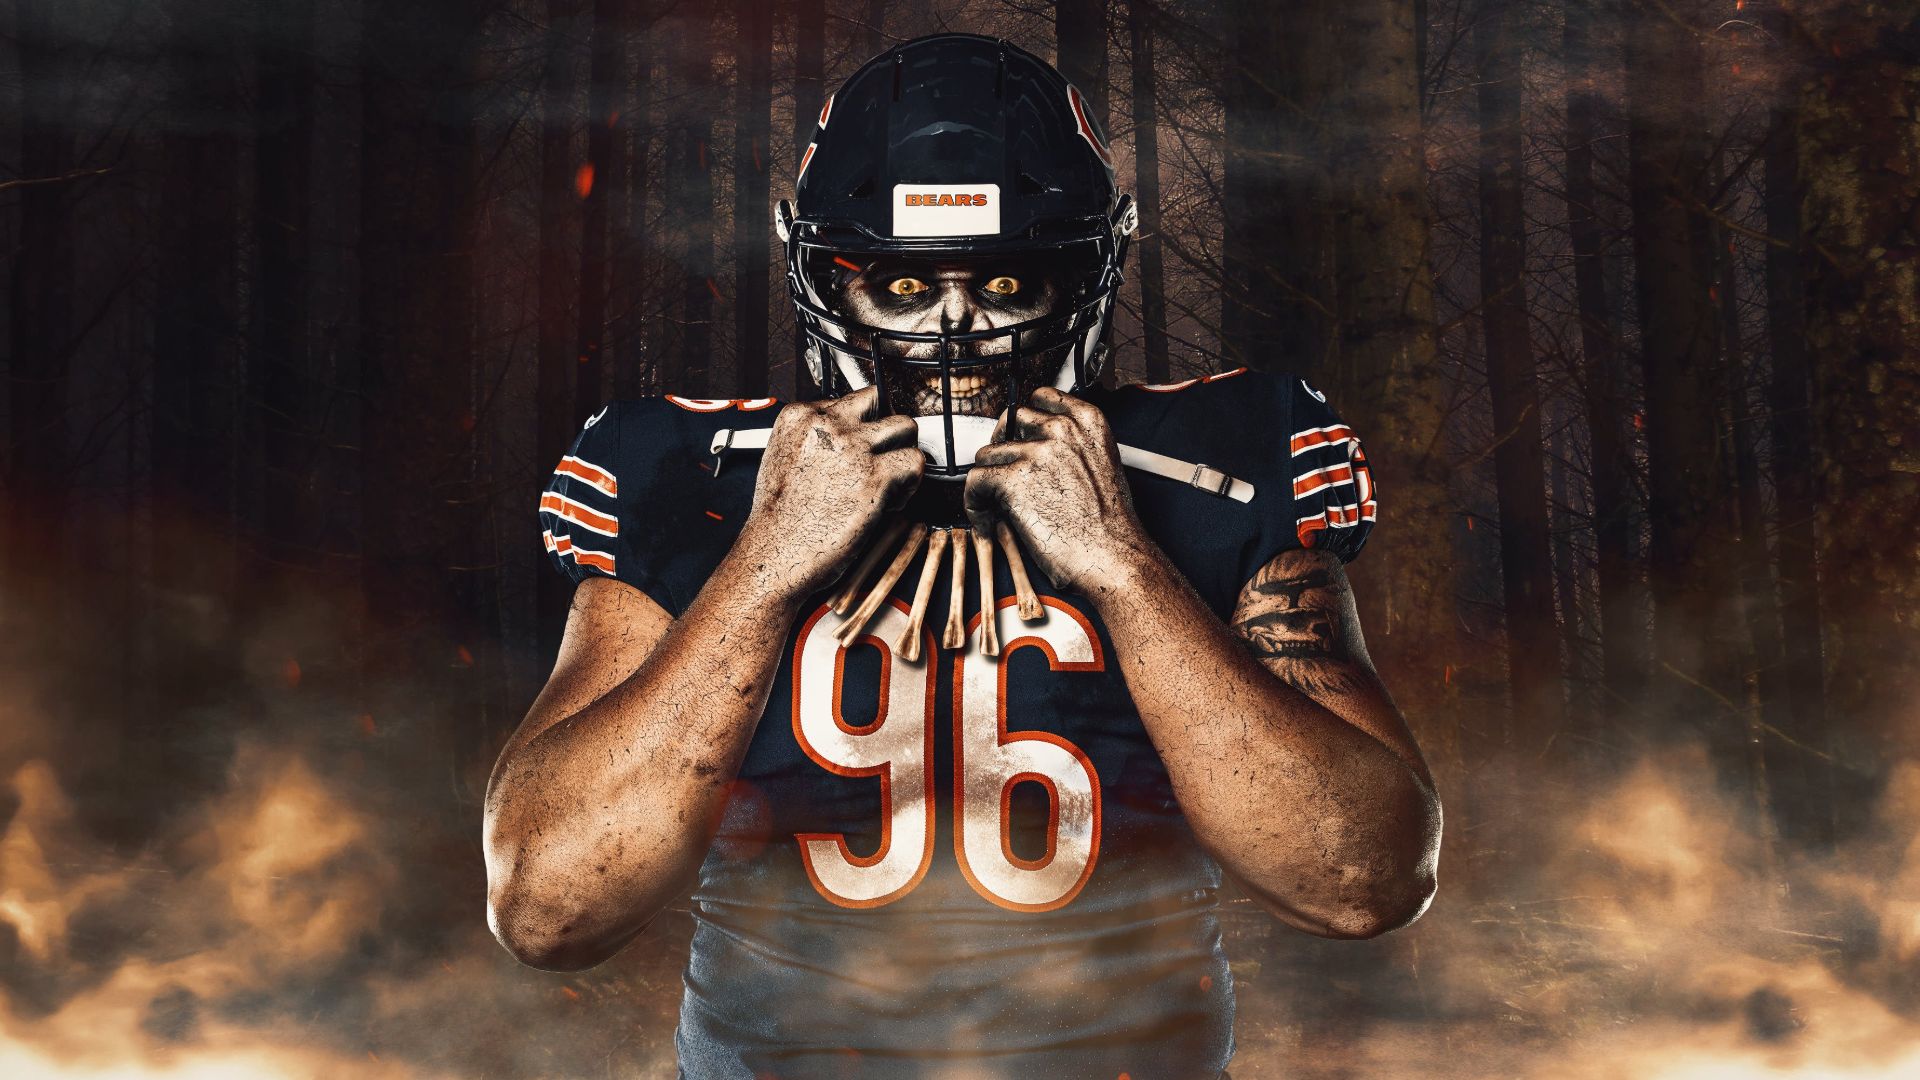 Download The Iconic Chicago Bears C Glowing Up the Evening Wallpaper